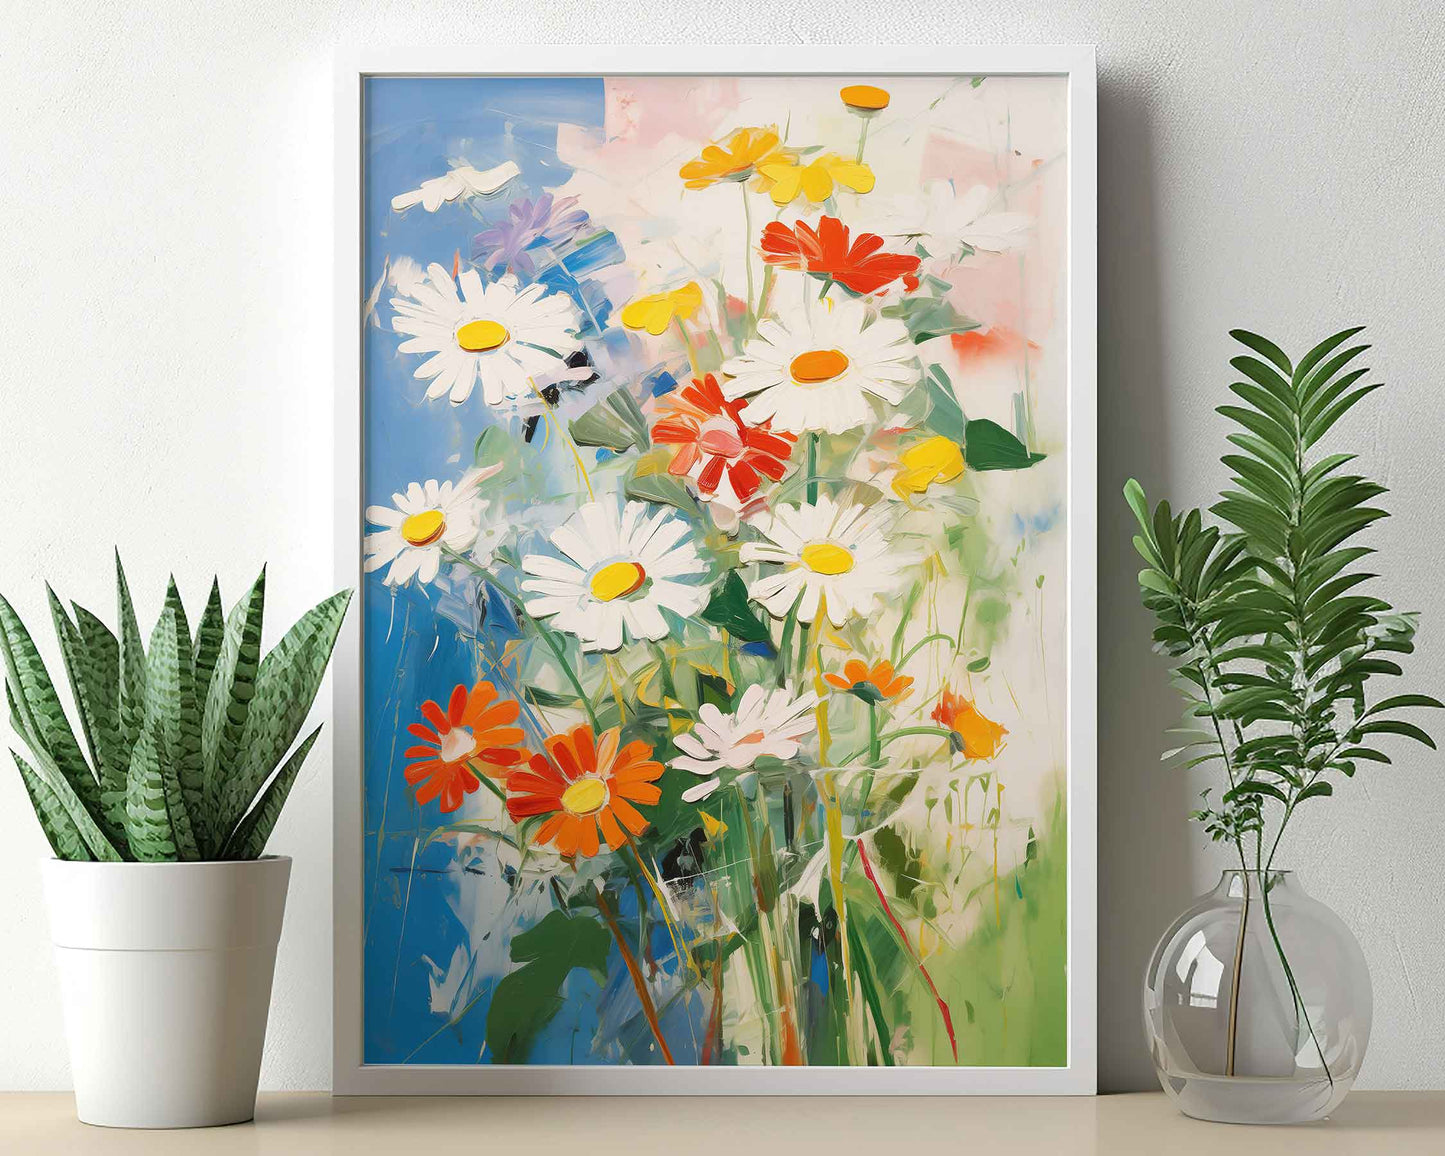 Framed Image of Abstract Expressionist Daisies Wall Art Print Poster